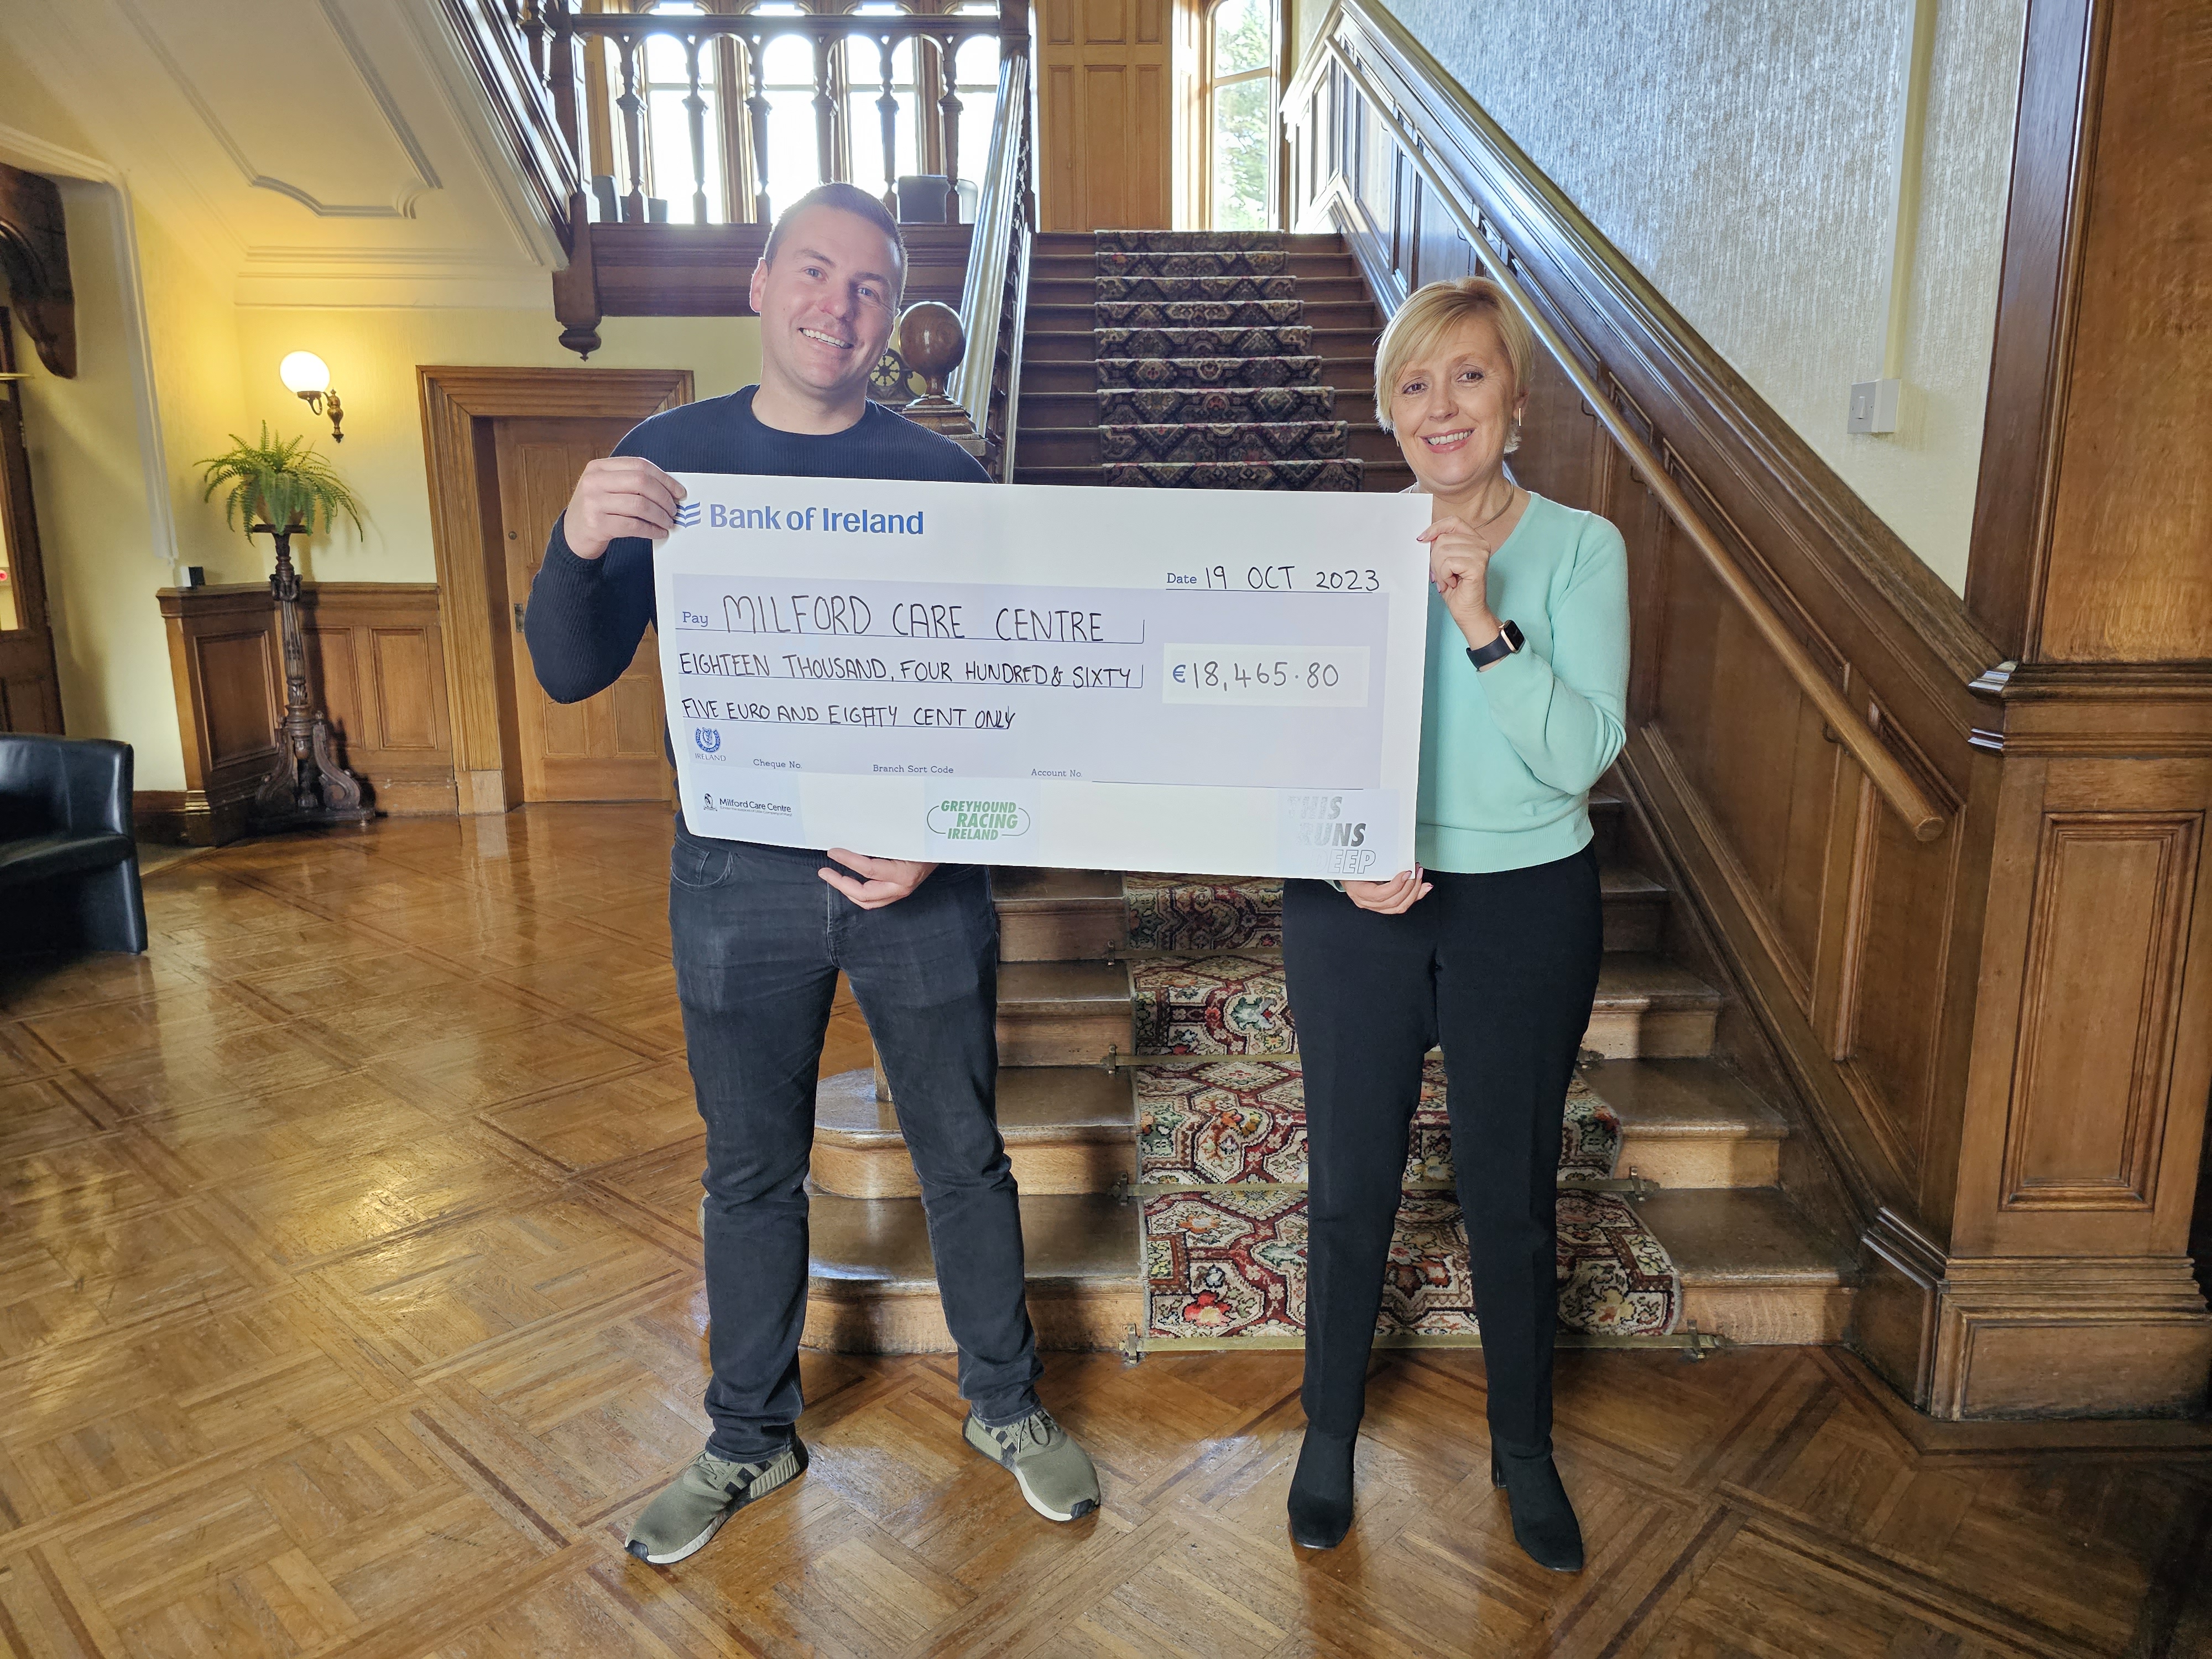 Tom Ahern proudly returned to Milford Care Centre this week to handover an impressive €18,465.80 to Fundraising Manager Anne Marie Hayes, the proceeds of the Night at the Dogs Fundraiser he held in Limerick Greyhound Stadium on Saturday 7th October. 